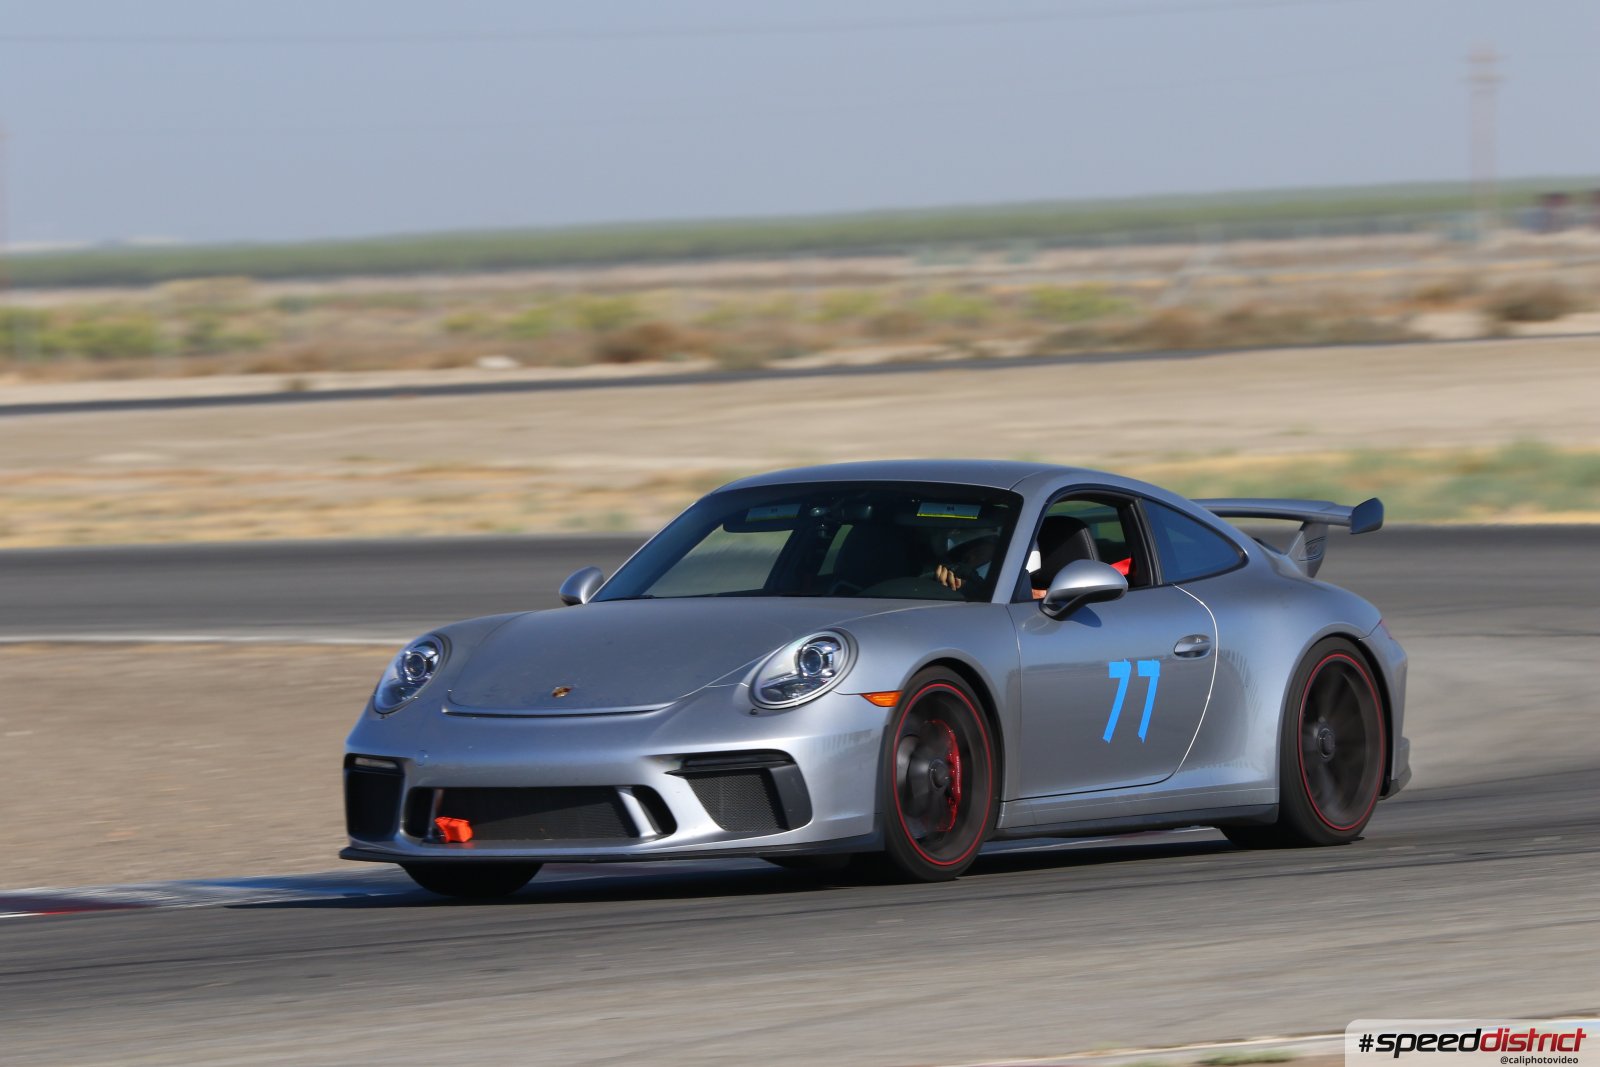 buttonwillow pic.jpg